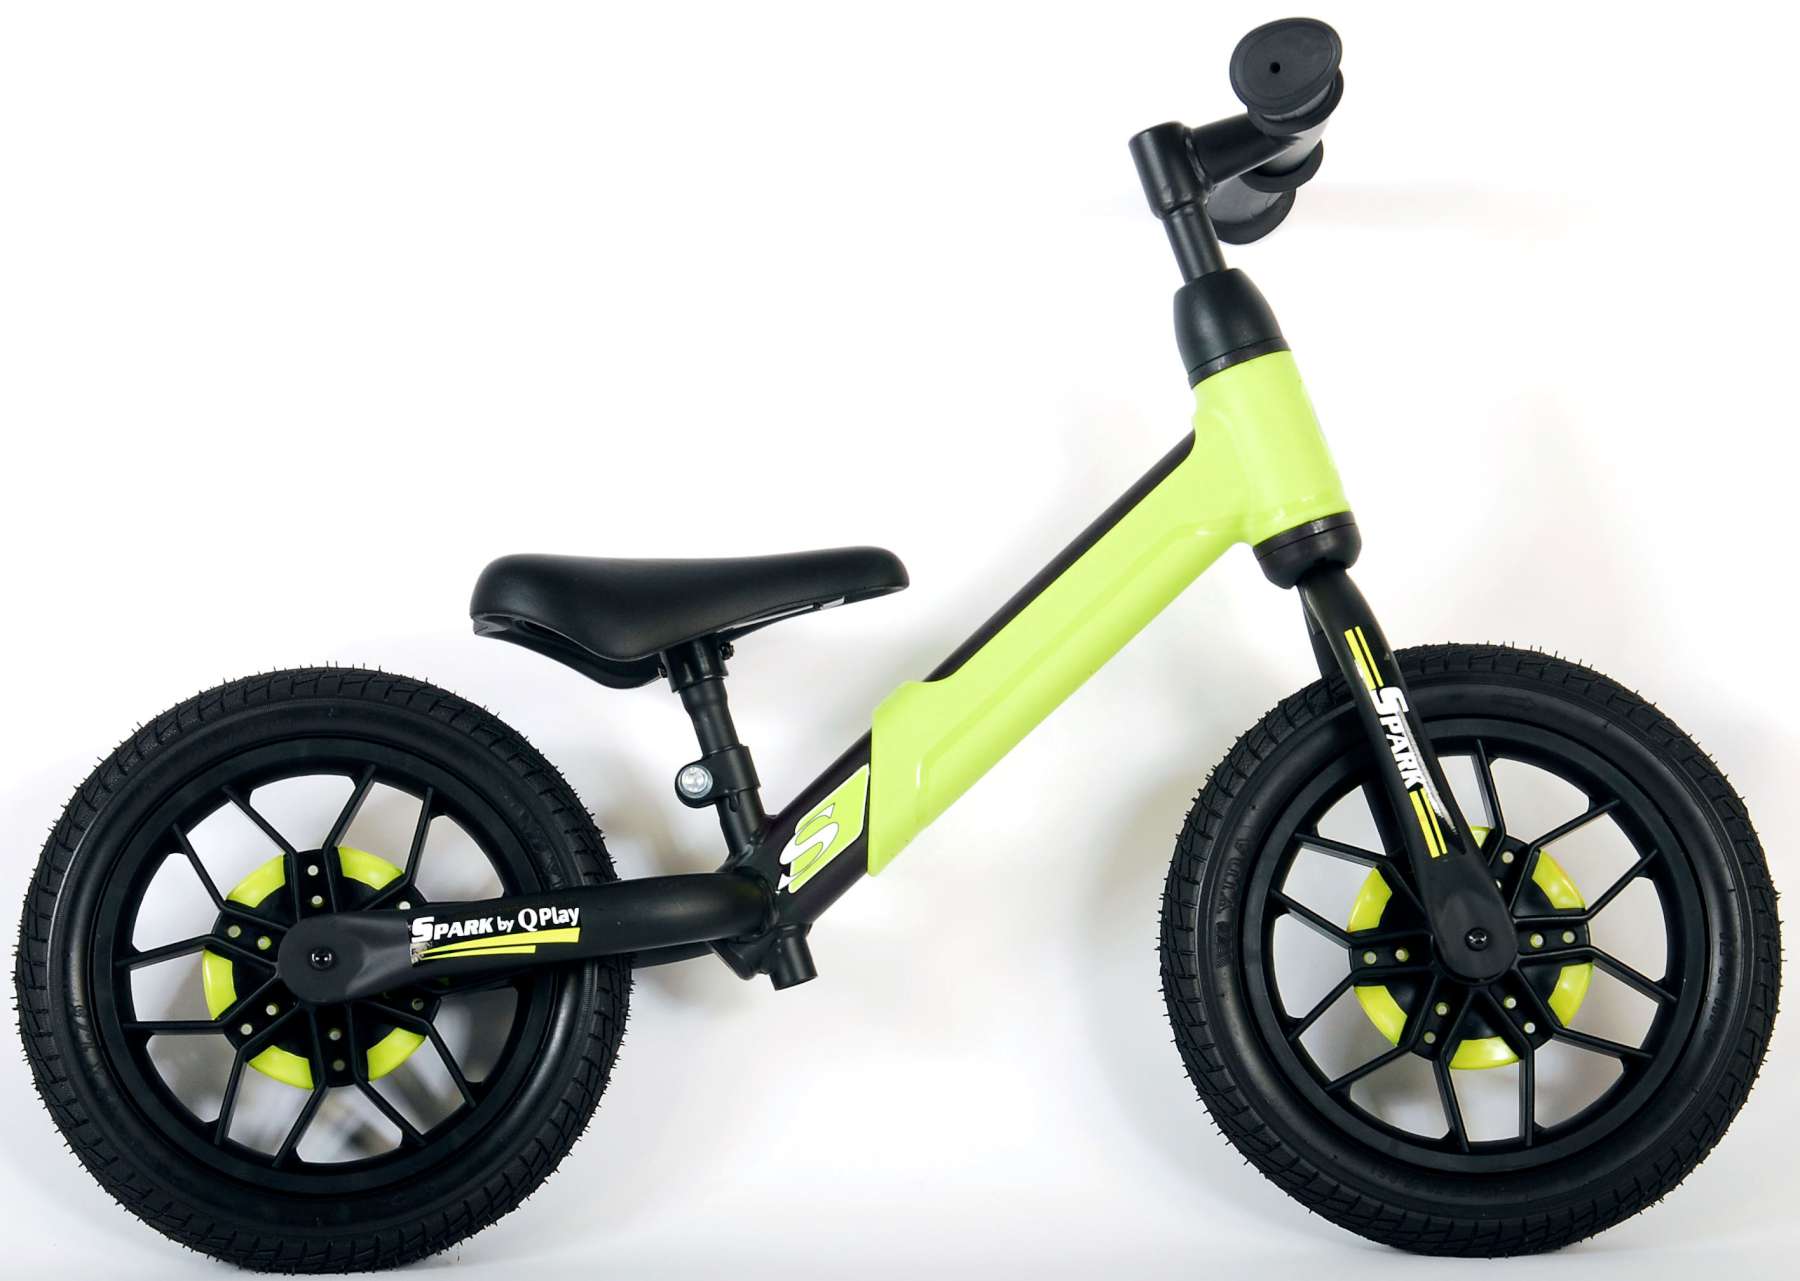 Details about   Children's Kids Bicycle 12Inch Wheels Boys & Girls Bike With Training Wheels US 